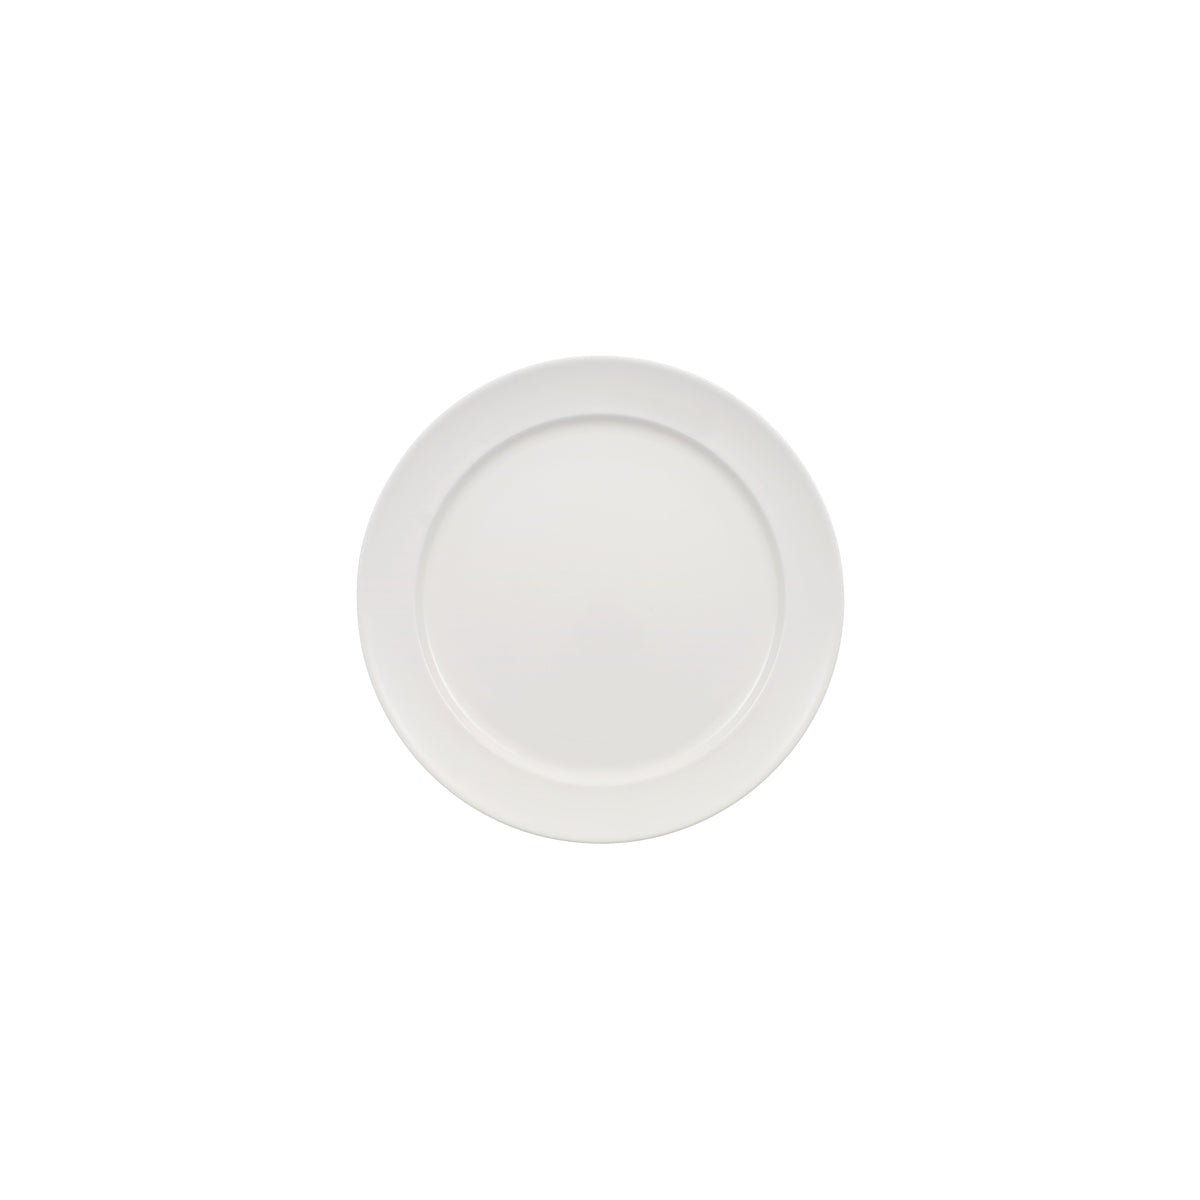 VB16-3275-2797 Villeroy And Boch Villeroy And Boch Marchesi White Plate Wide Rim 220mm Tomkin Australia Hospitality Supplies